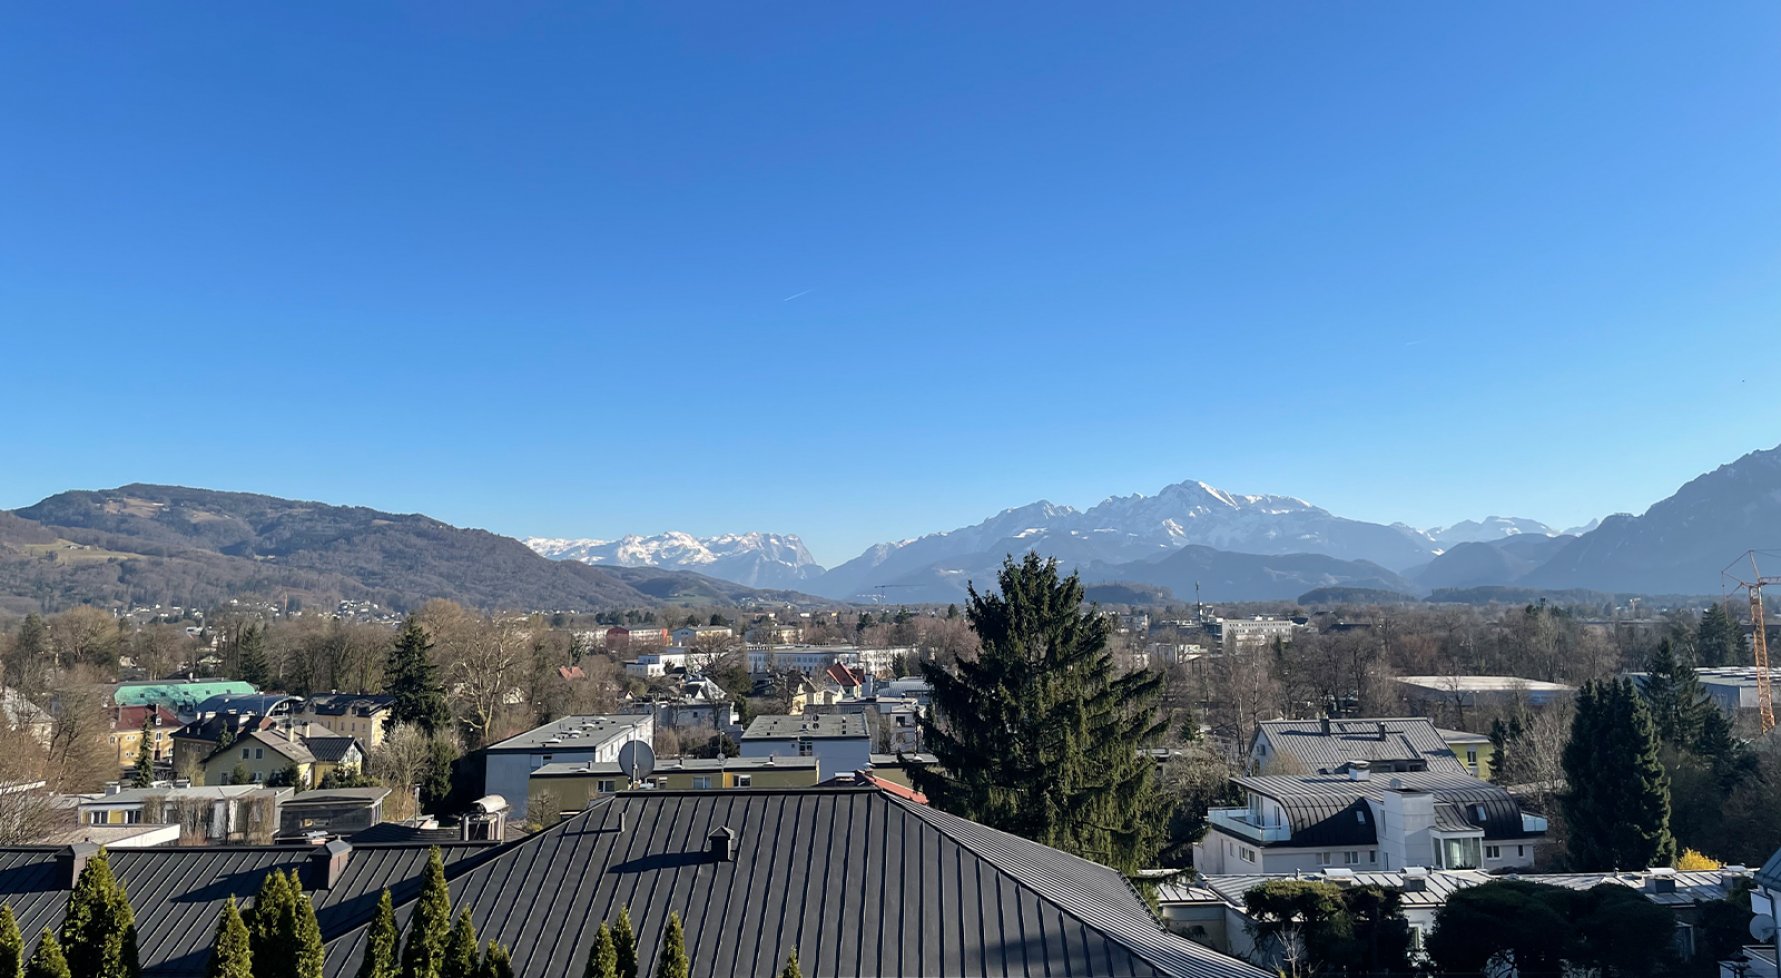 Property in 5020 Salzburg - Parsch: Unique and fabulous location! 4-room loft apartment with panoramic view - picture 1